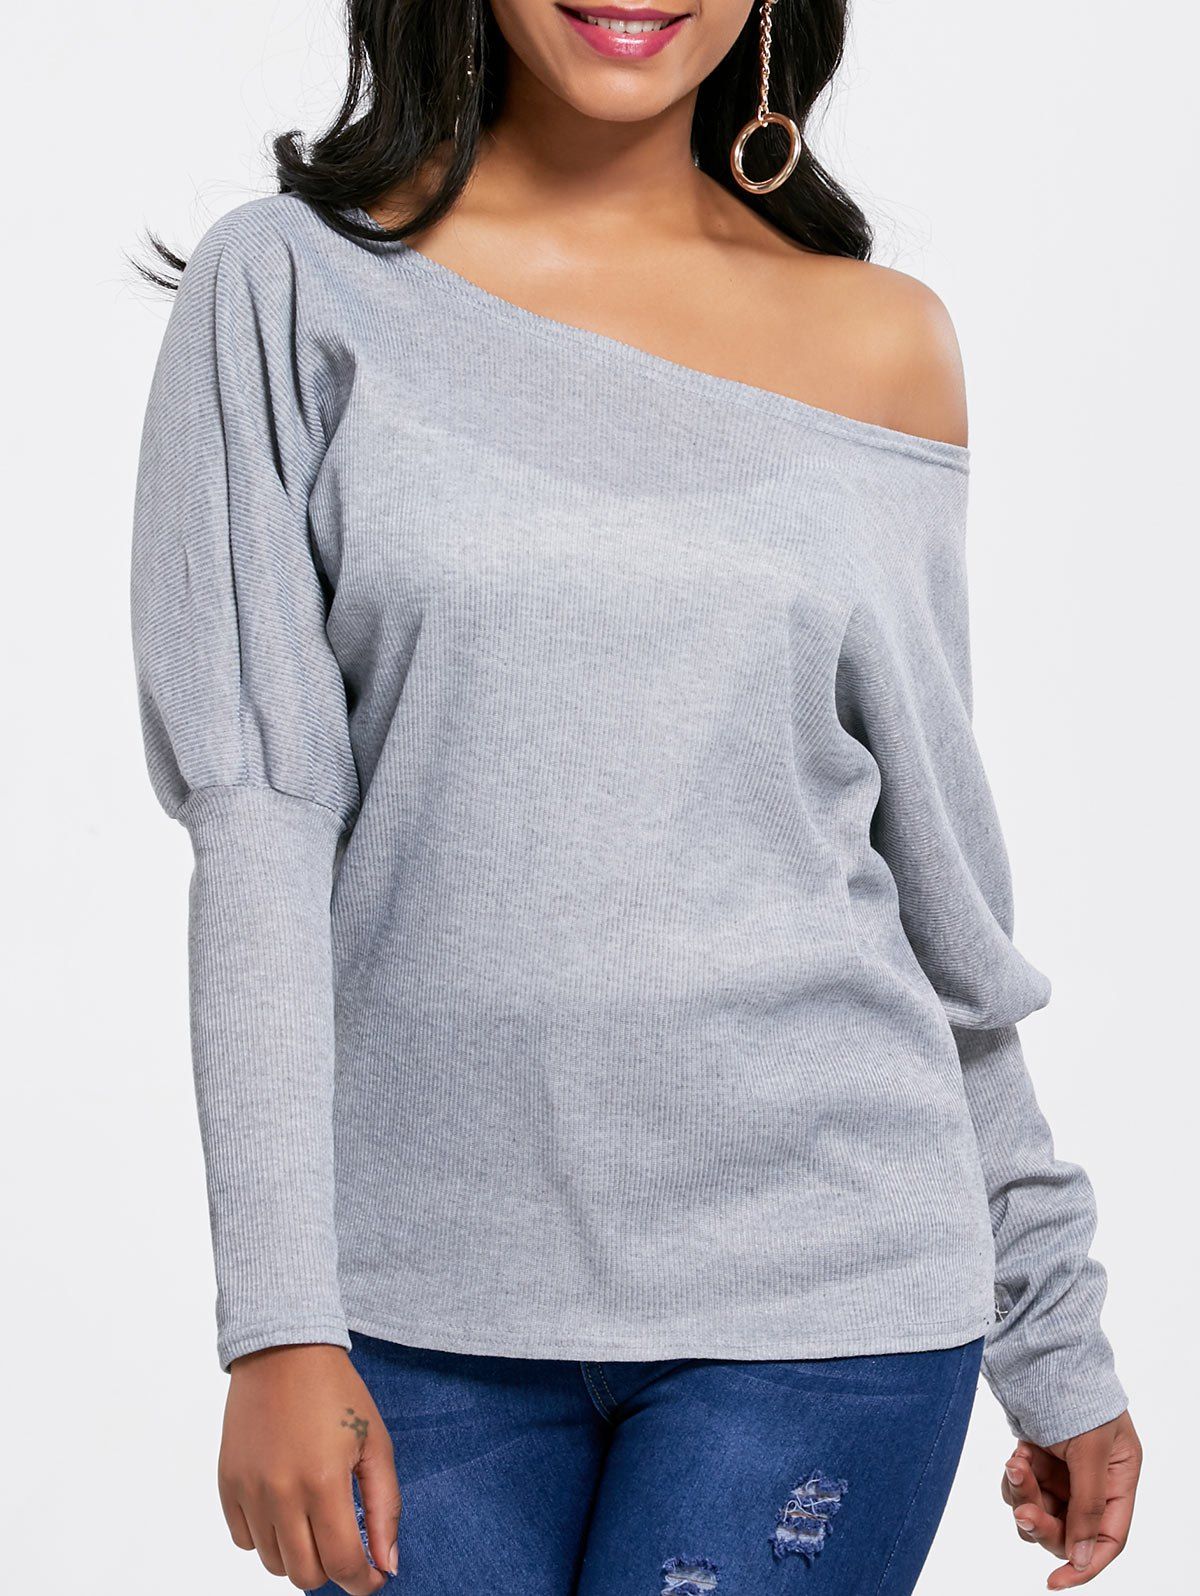 [76% OFF] Skew Collar Knitted Batwing Sleeve Top | Rosegal